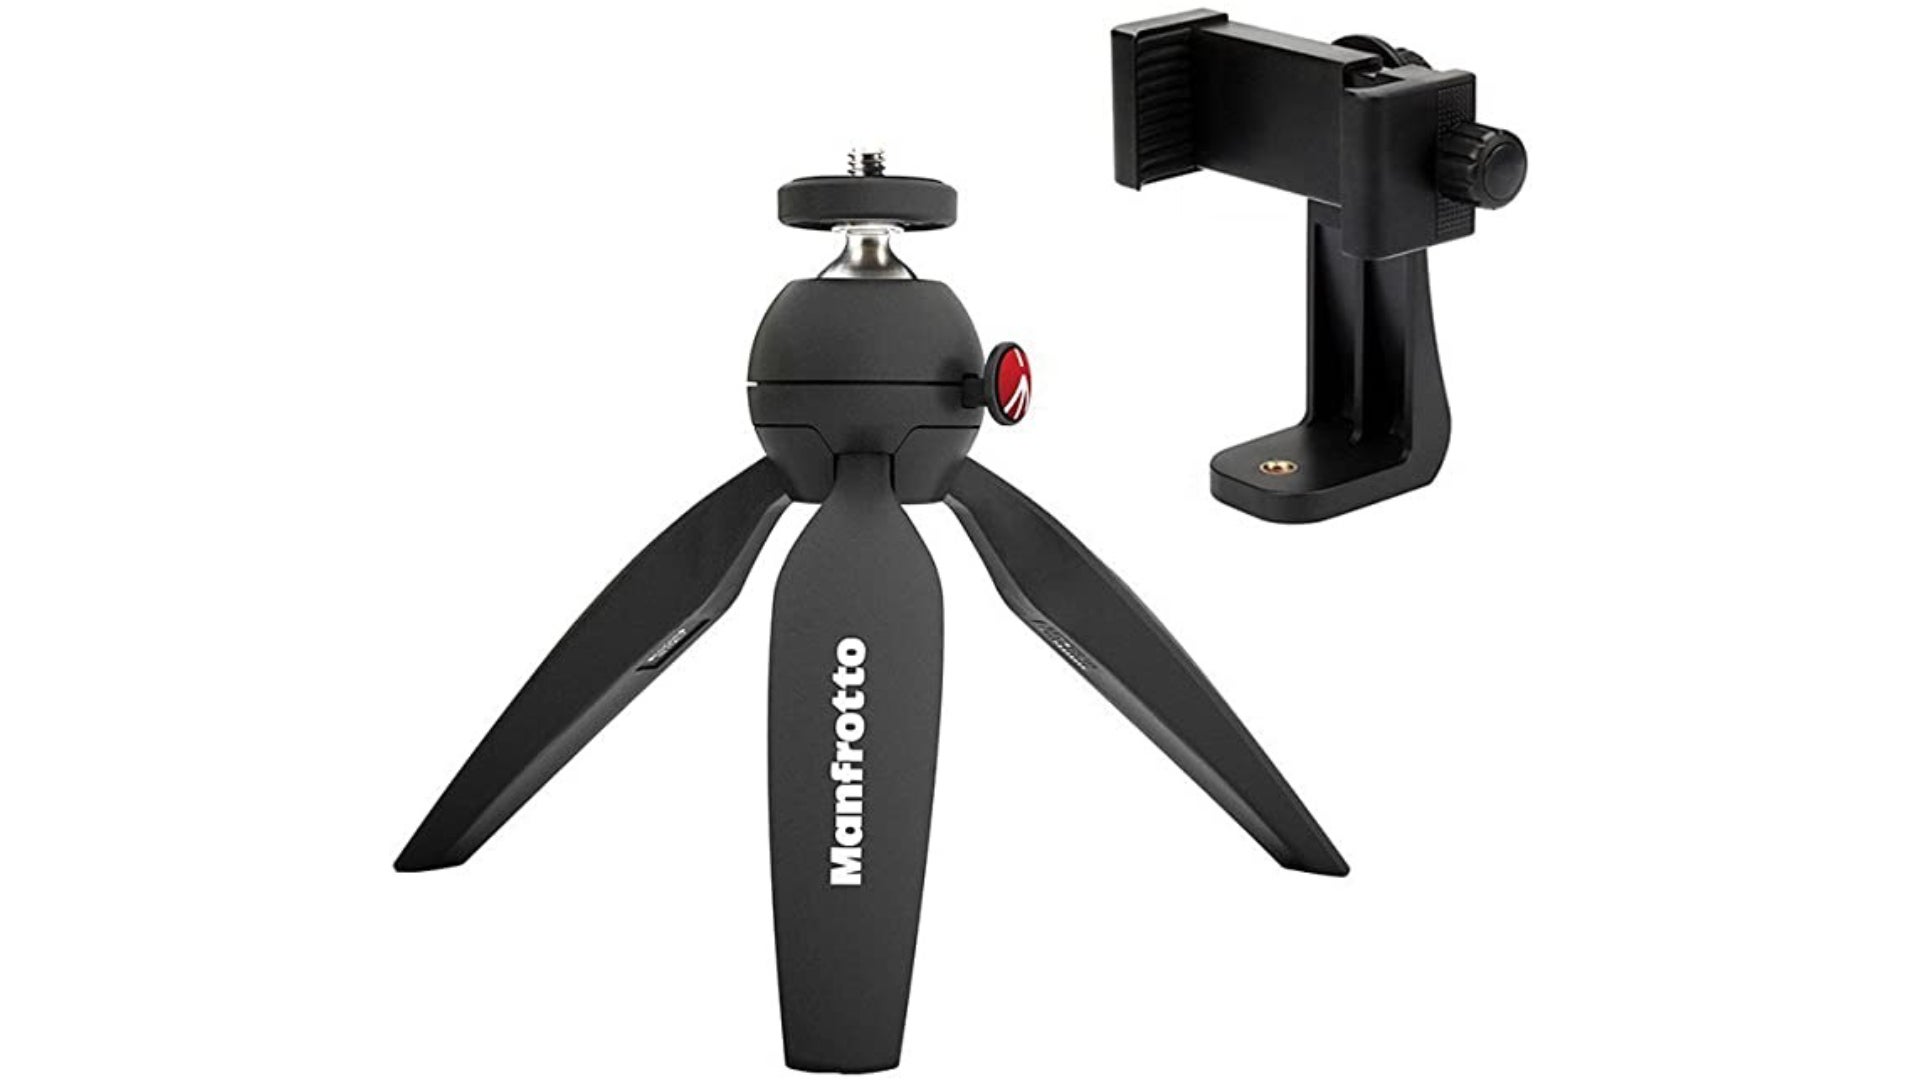 Manfrotto Pixi Mini compact tripod. - Best phone tripods for video calls, vlogging, or live streaming